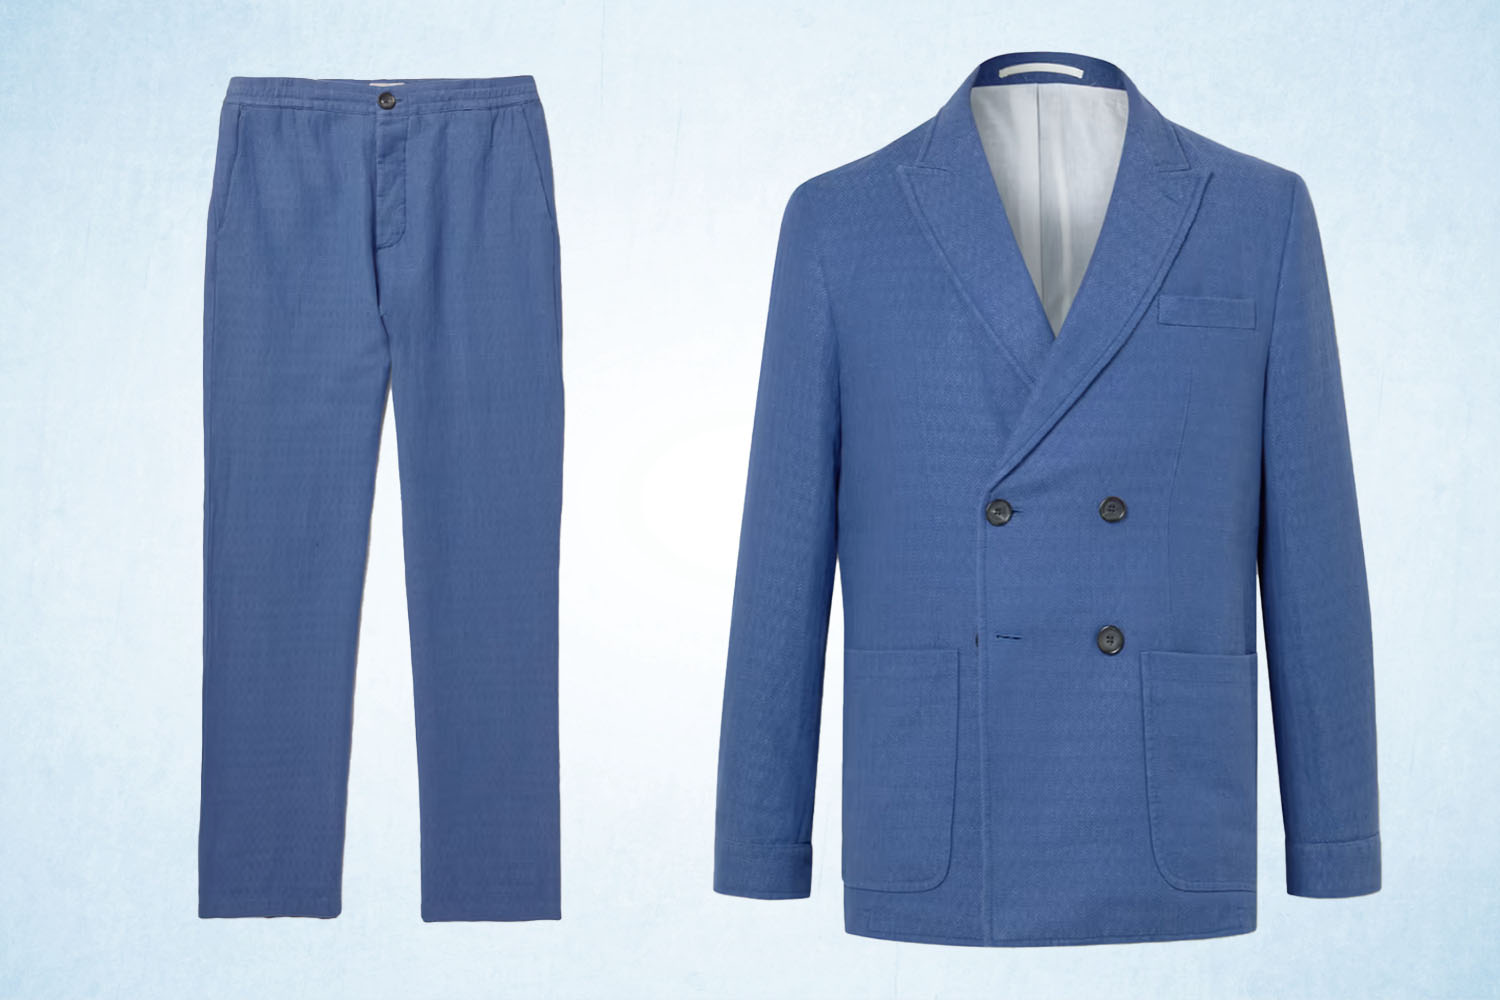 a light blue, double breasted linen suit from Oliver Spencer on a ice-blue background